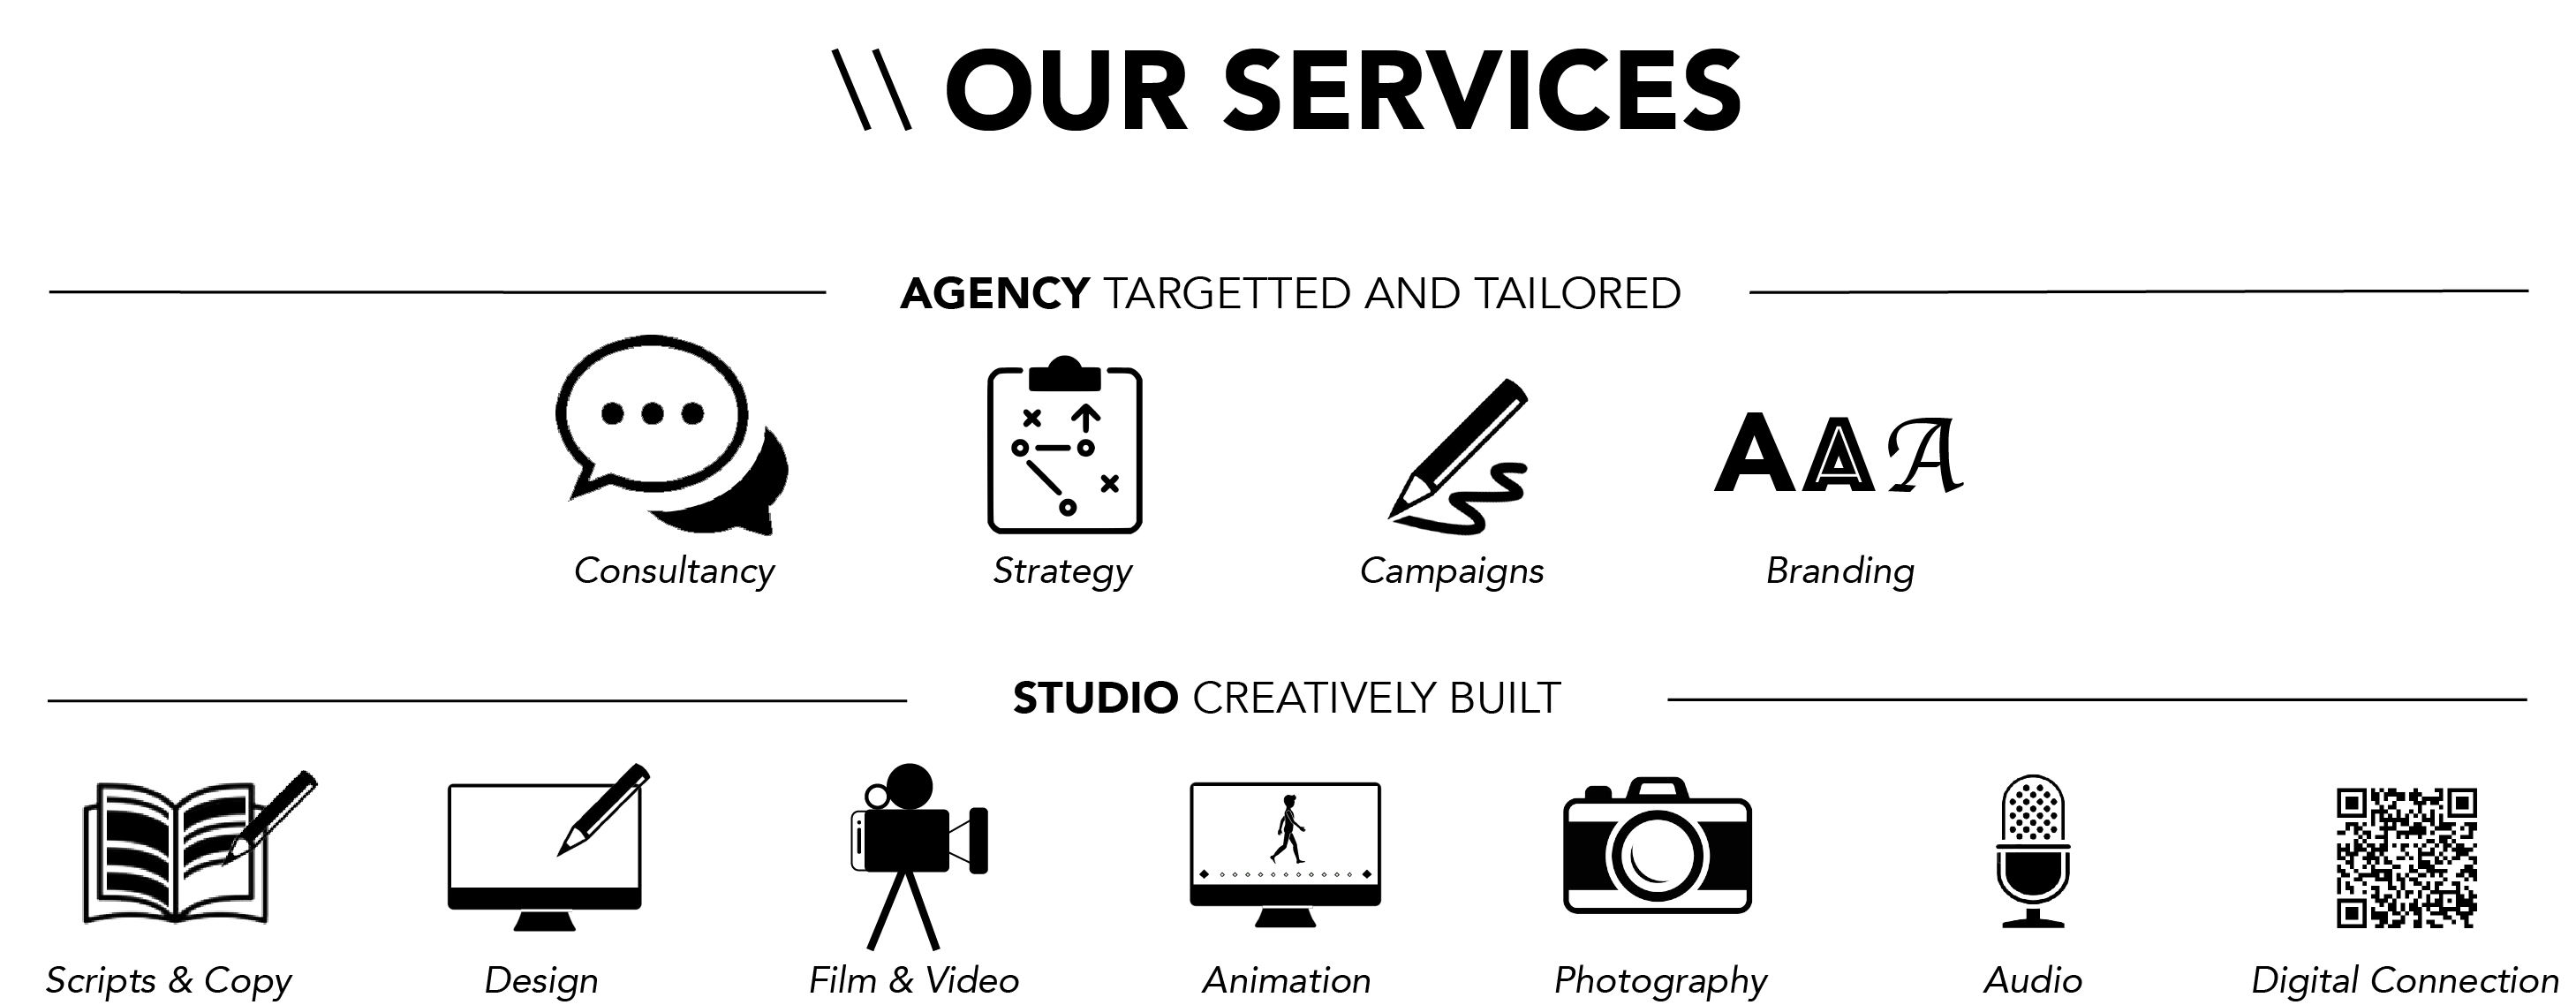 our services - campaigns strategy branding scripts copy design film video animation photography audio digital connection